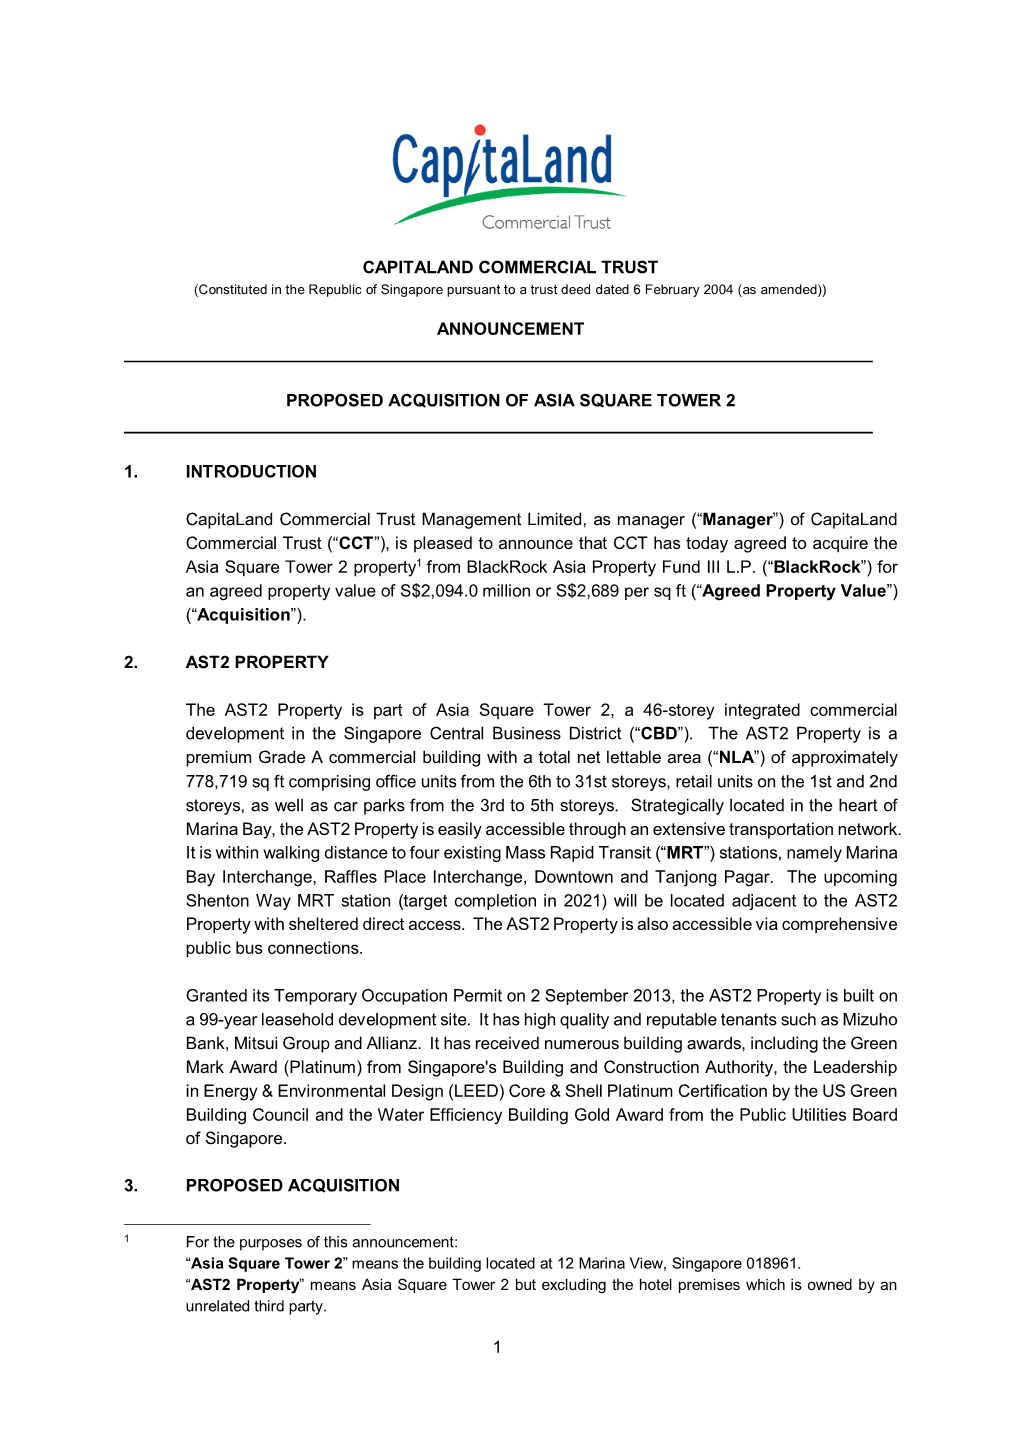 CAPITALAND COMMERCIAL TRUST (Constituted in the Republic of Singapore Pursuant to a Trust Deed Dated 6 February 2004 (As Amended))